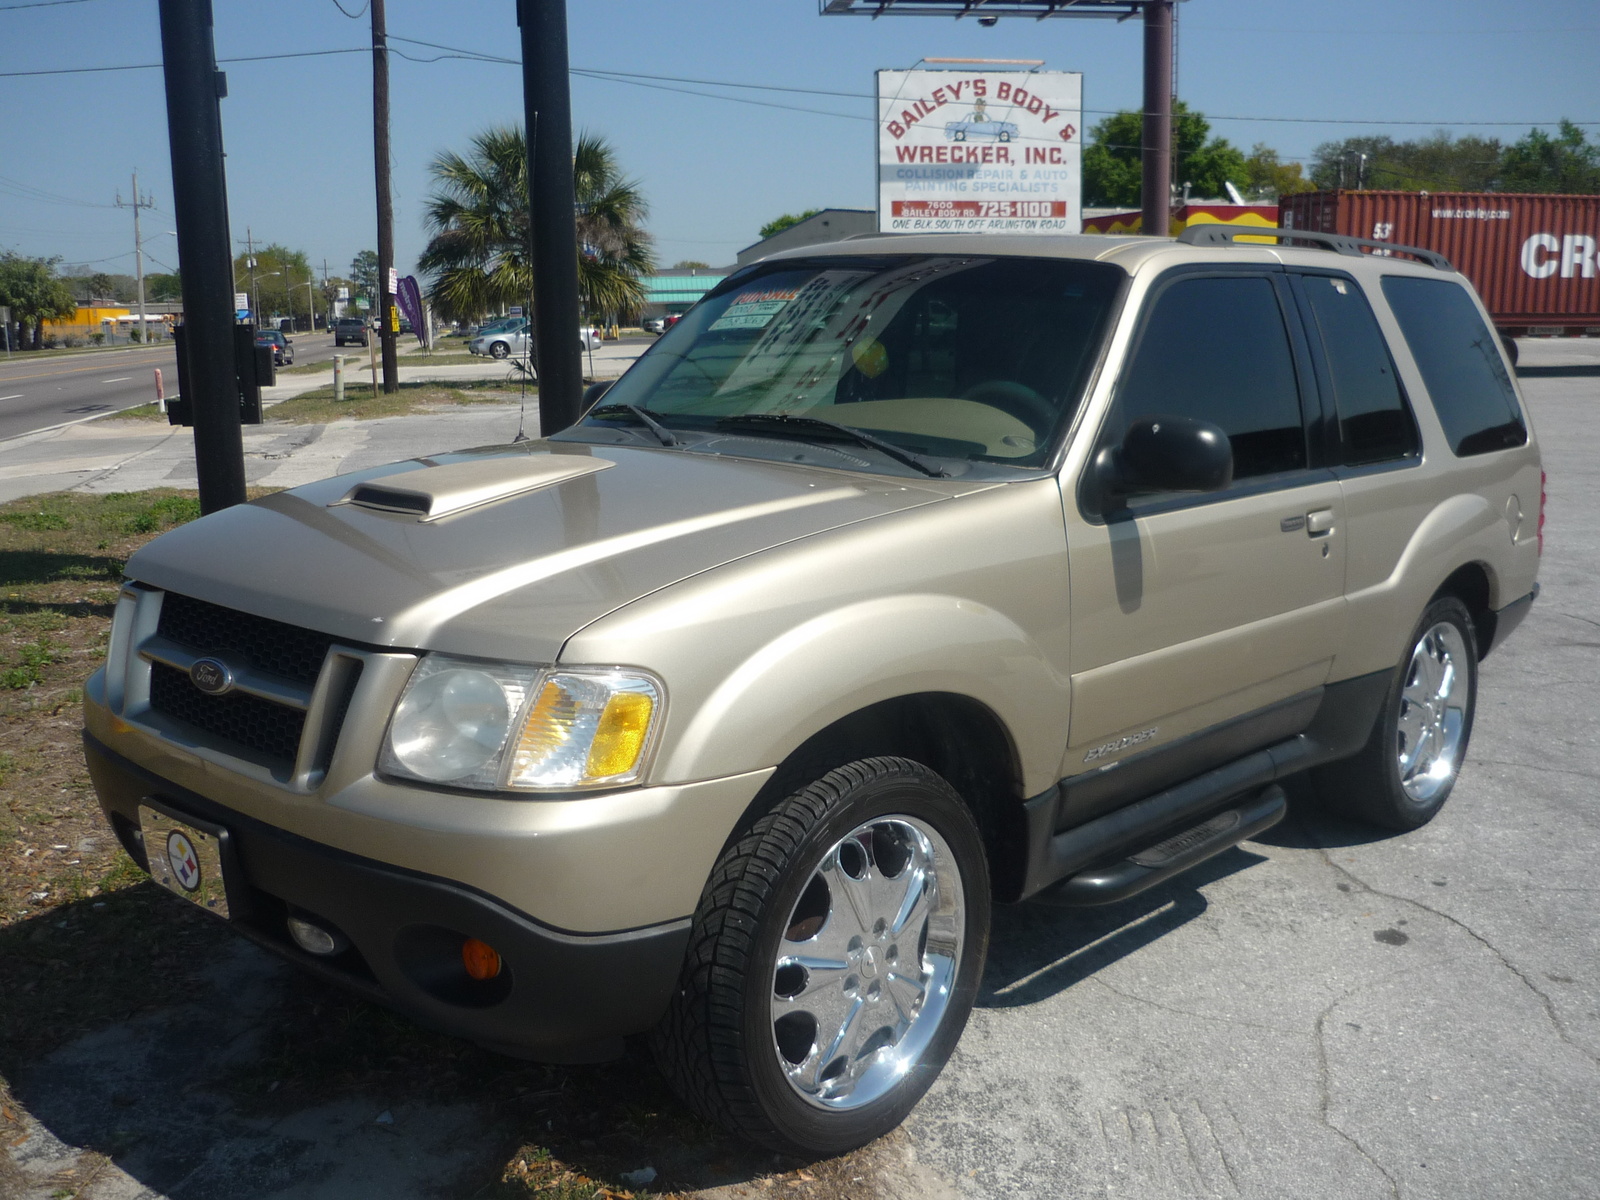 Used 2001 ford explorer sport review #2